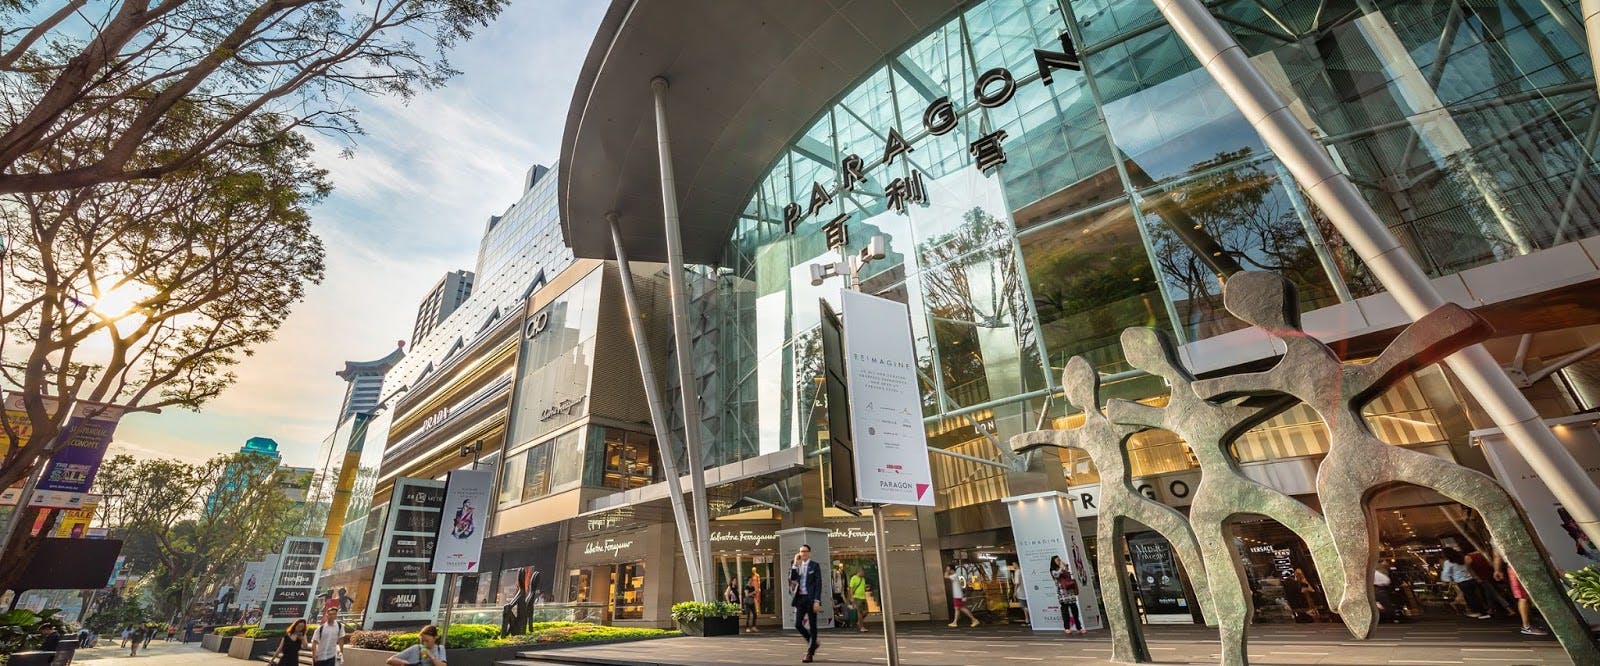 Located 1km from One Leonie Residences sits Paragon shopping mall, a one-stop destination that provides everything from specialist clinics, boutique shops, an up-class supermarket and even a floor dedicated to children’s needs